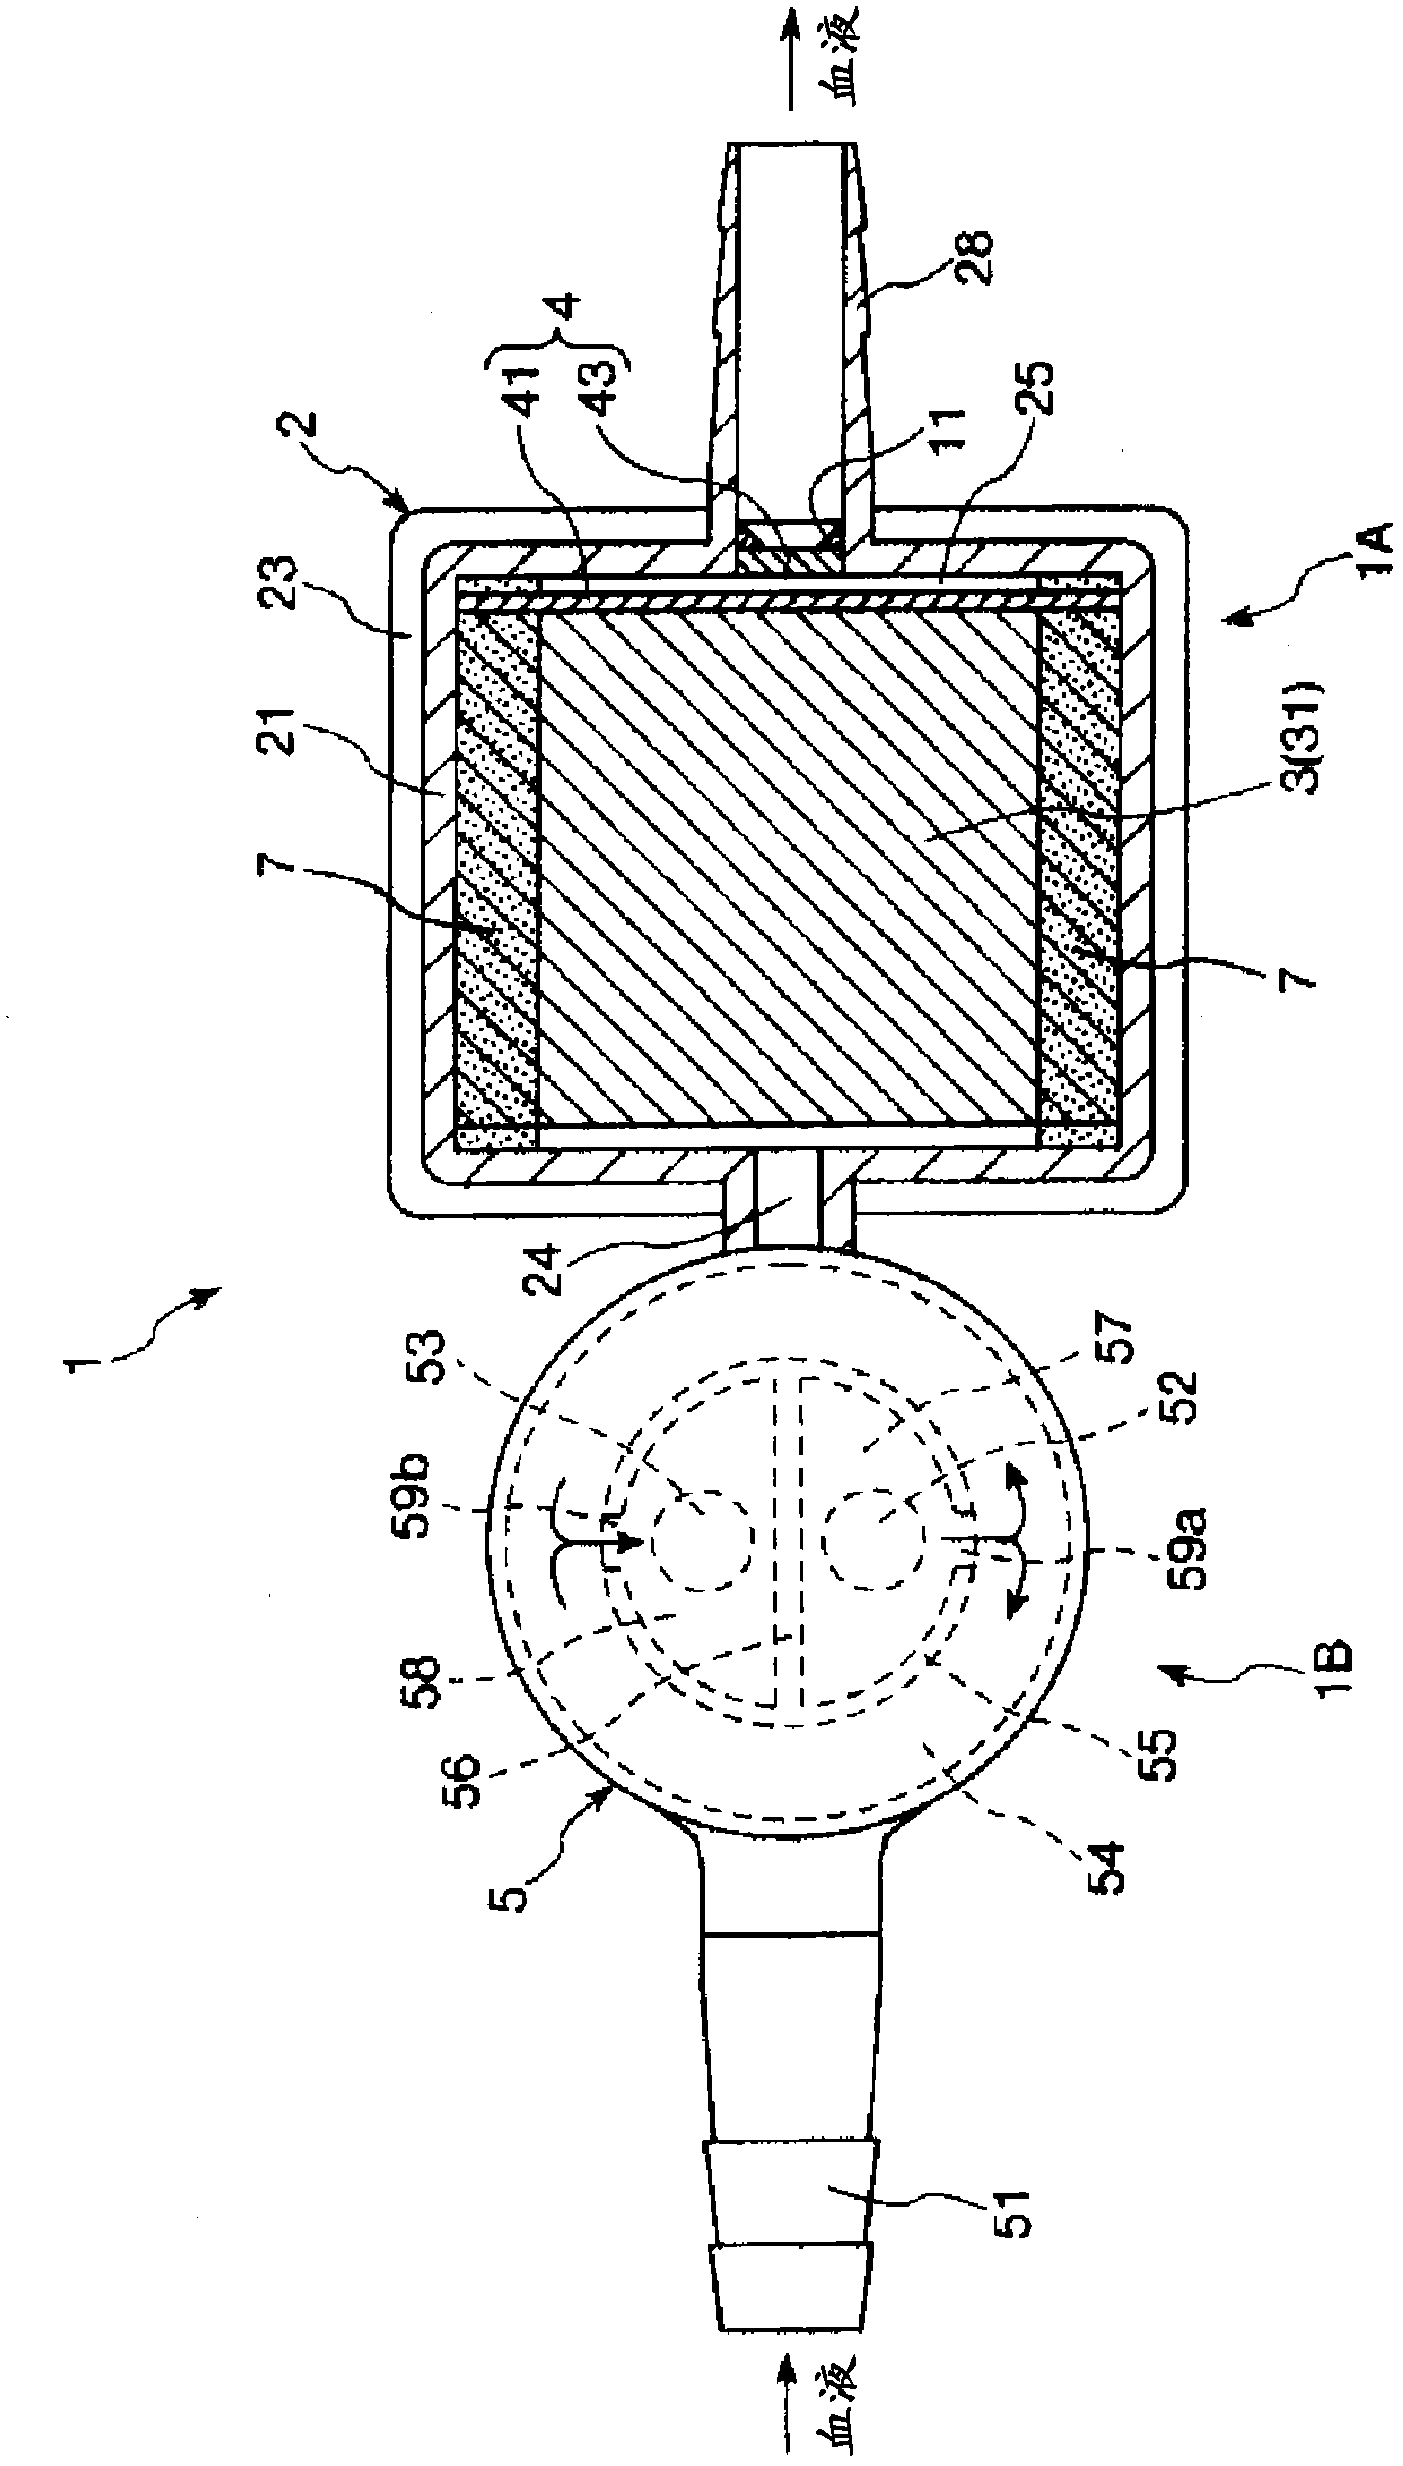 Artificial lung and extracorporeal circulation device